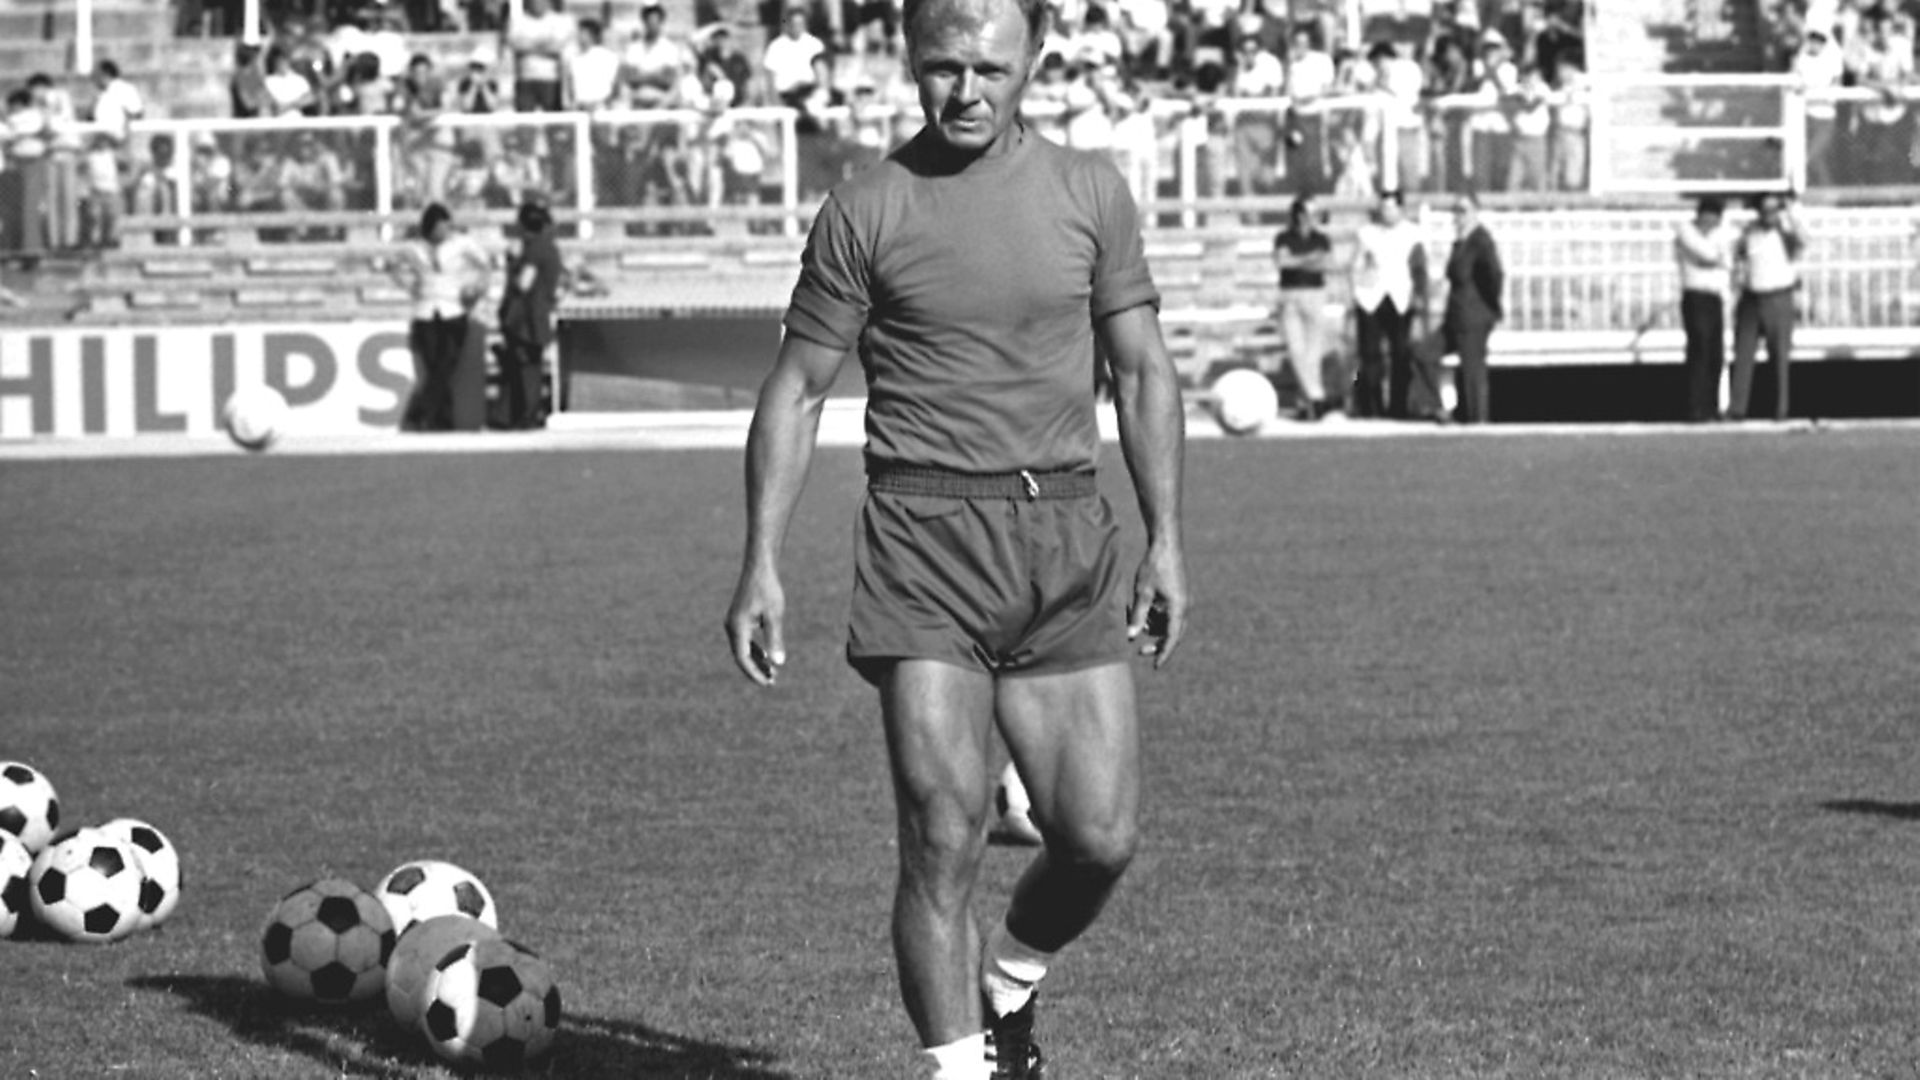 Spanish soccer player Ladislao Kubala (1927-2002) during a workout, Bacelona, Spain, 1979. (Photo by Gianni Ferrari/Cover/Getty Images). - Credit: Getty Images